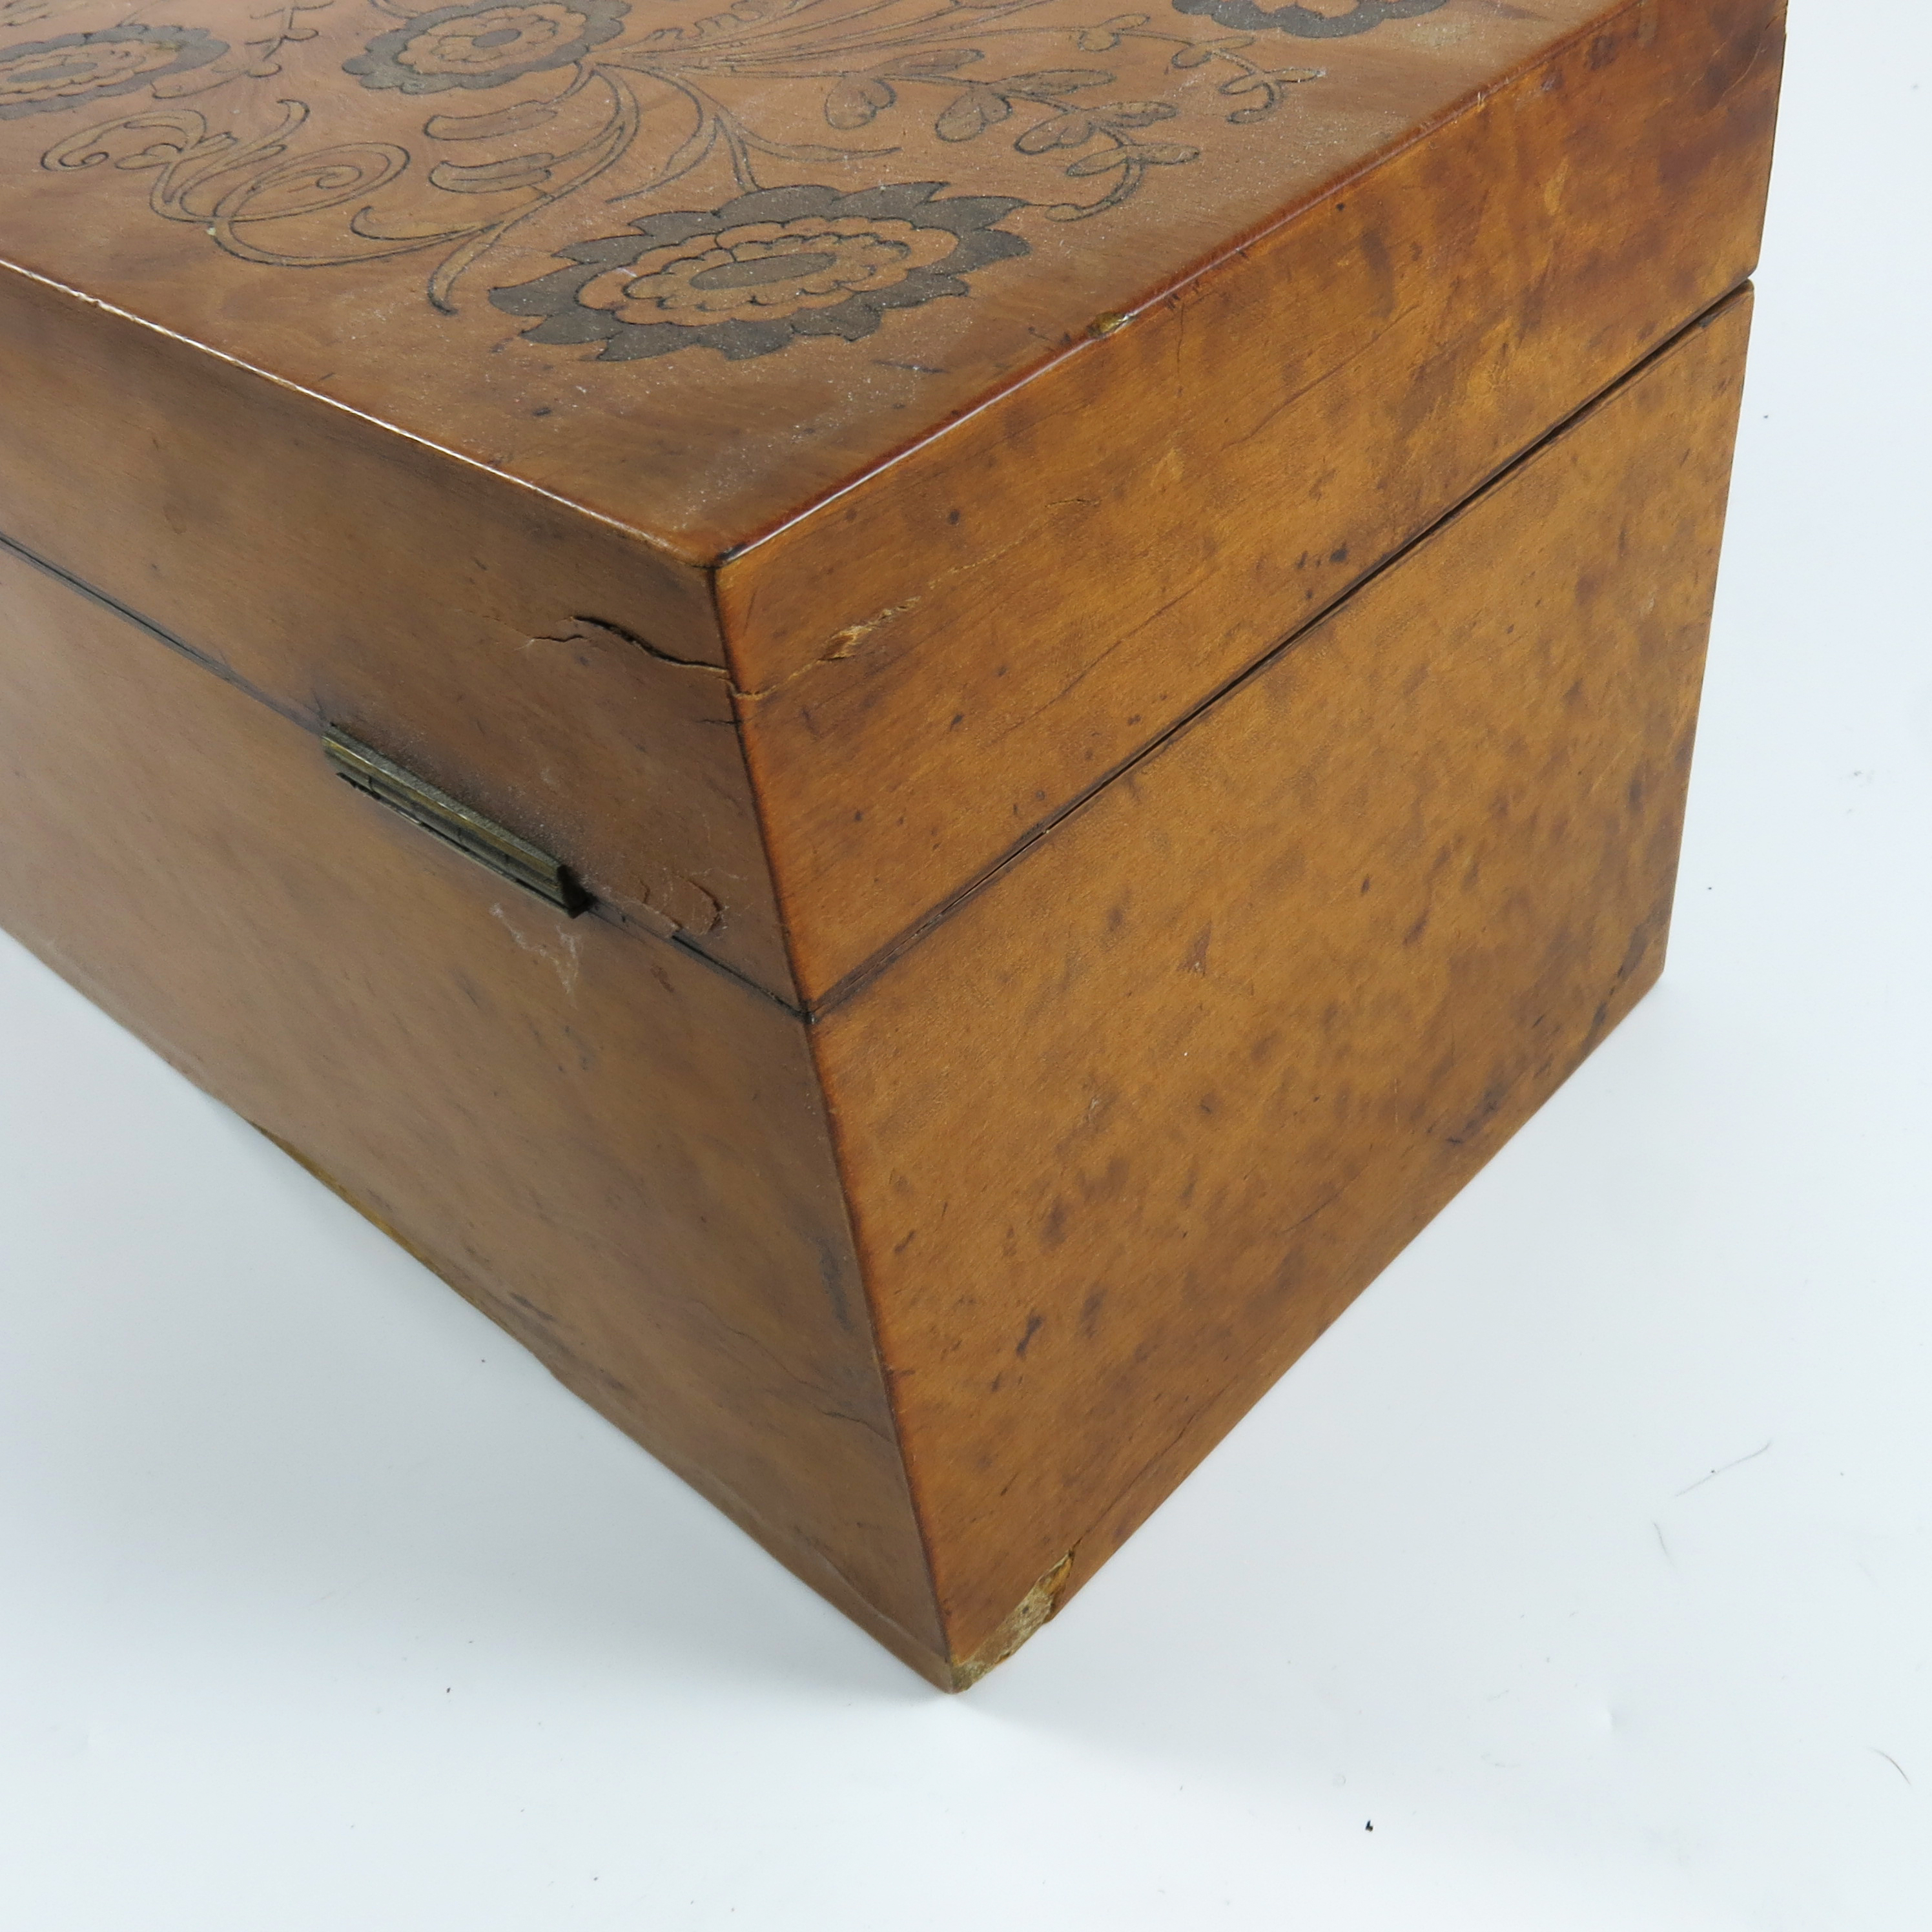 TEA CADDY WITH FLORAL POKER WORK DECORATION AND FITTED INTERIOR - Image 8 of 8